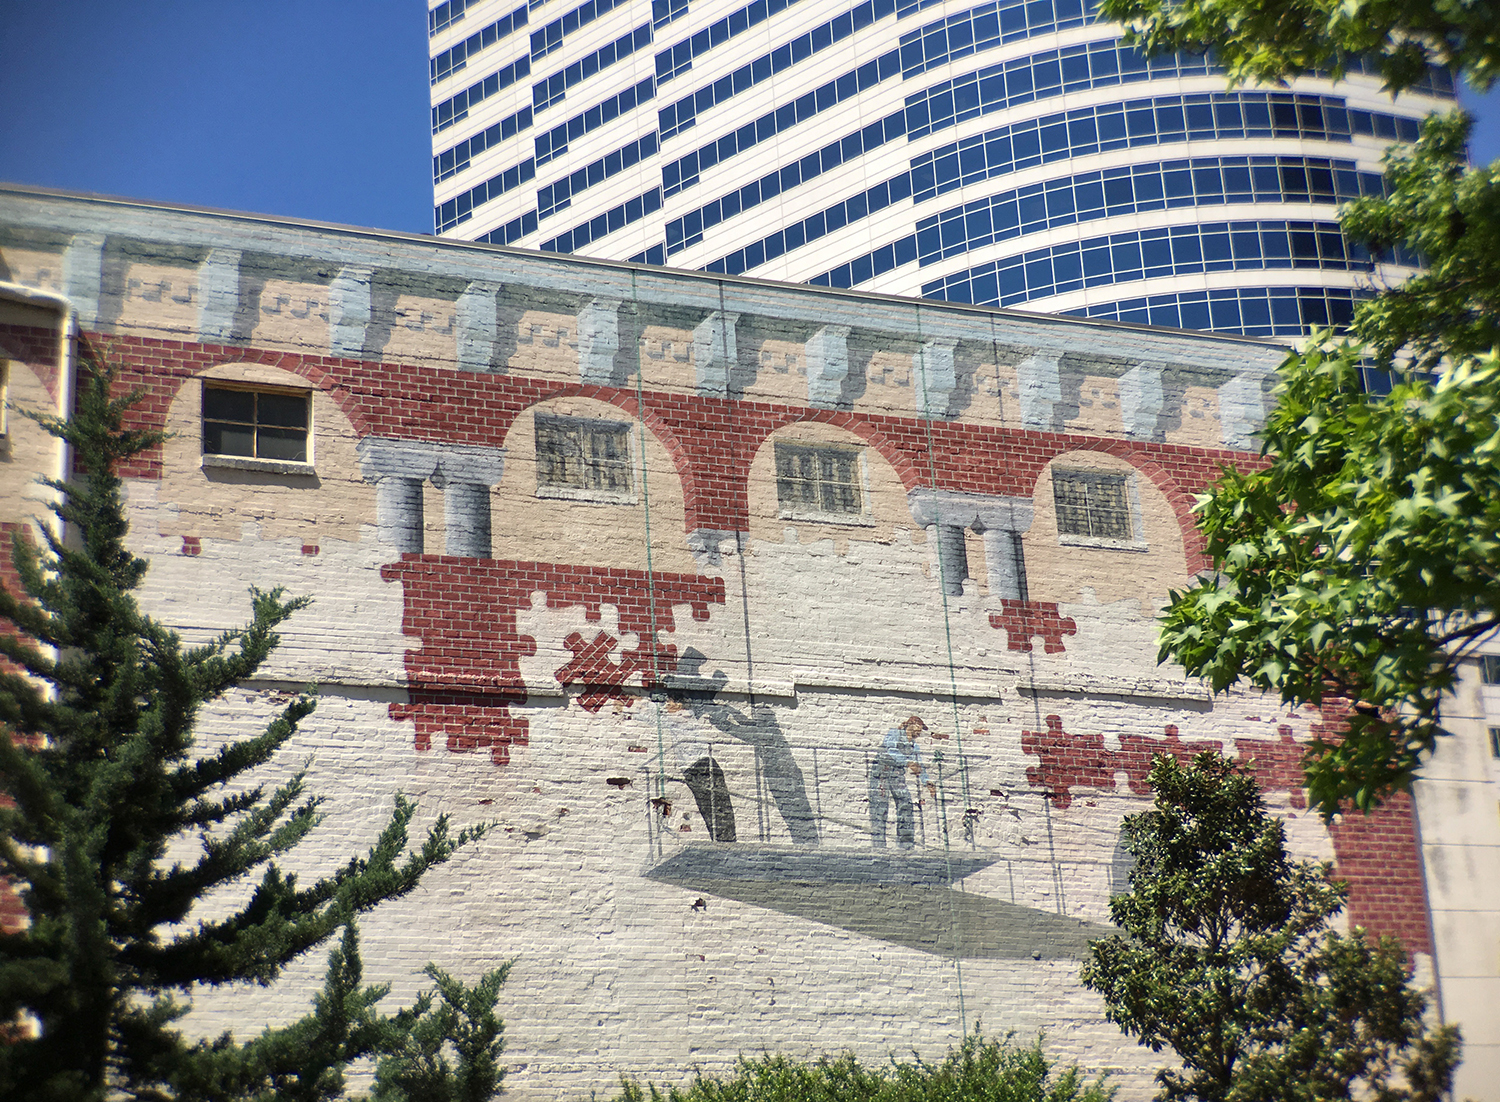  Across from the downtown public library, a trompe l’oeil mural. Those always grab my attention. 